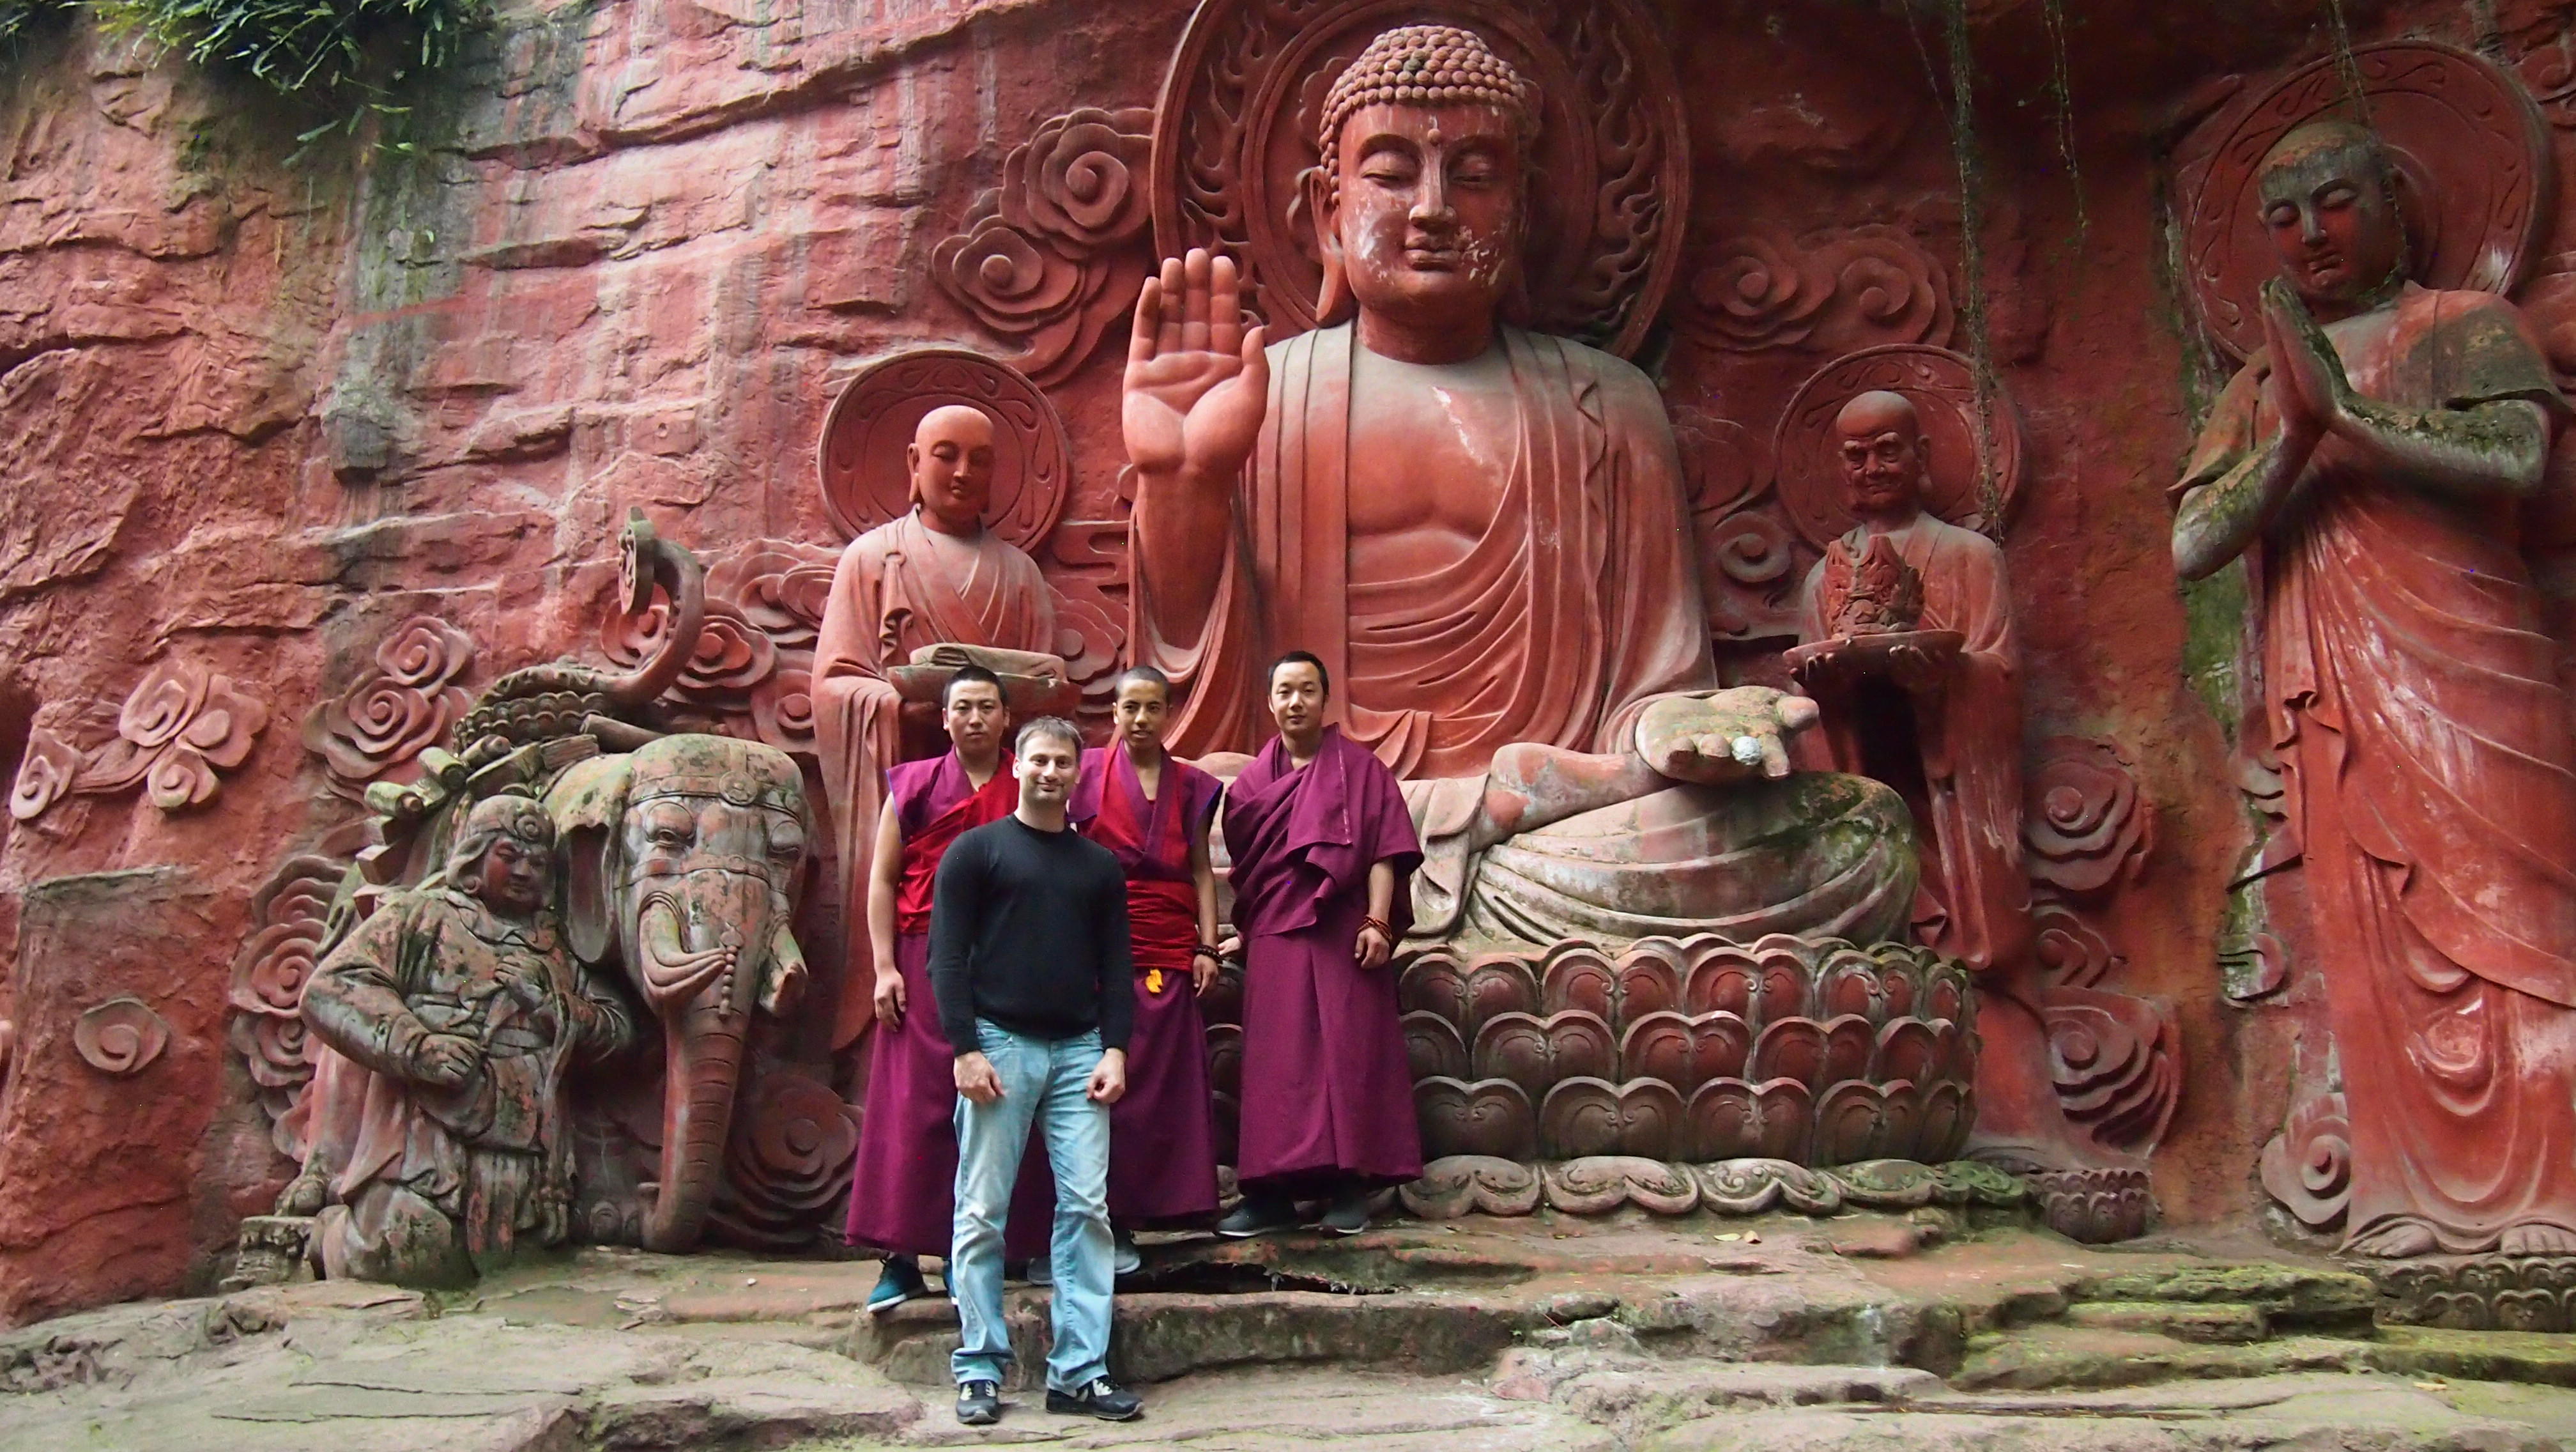 With some of the monks in Emei